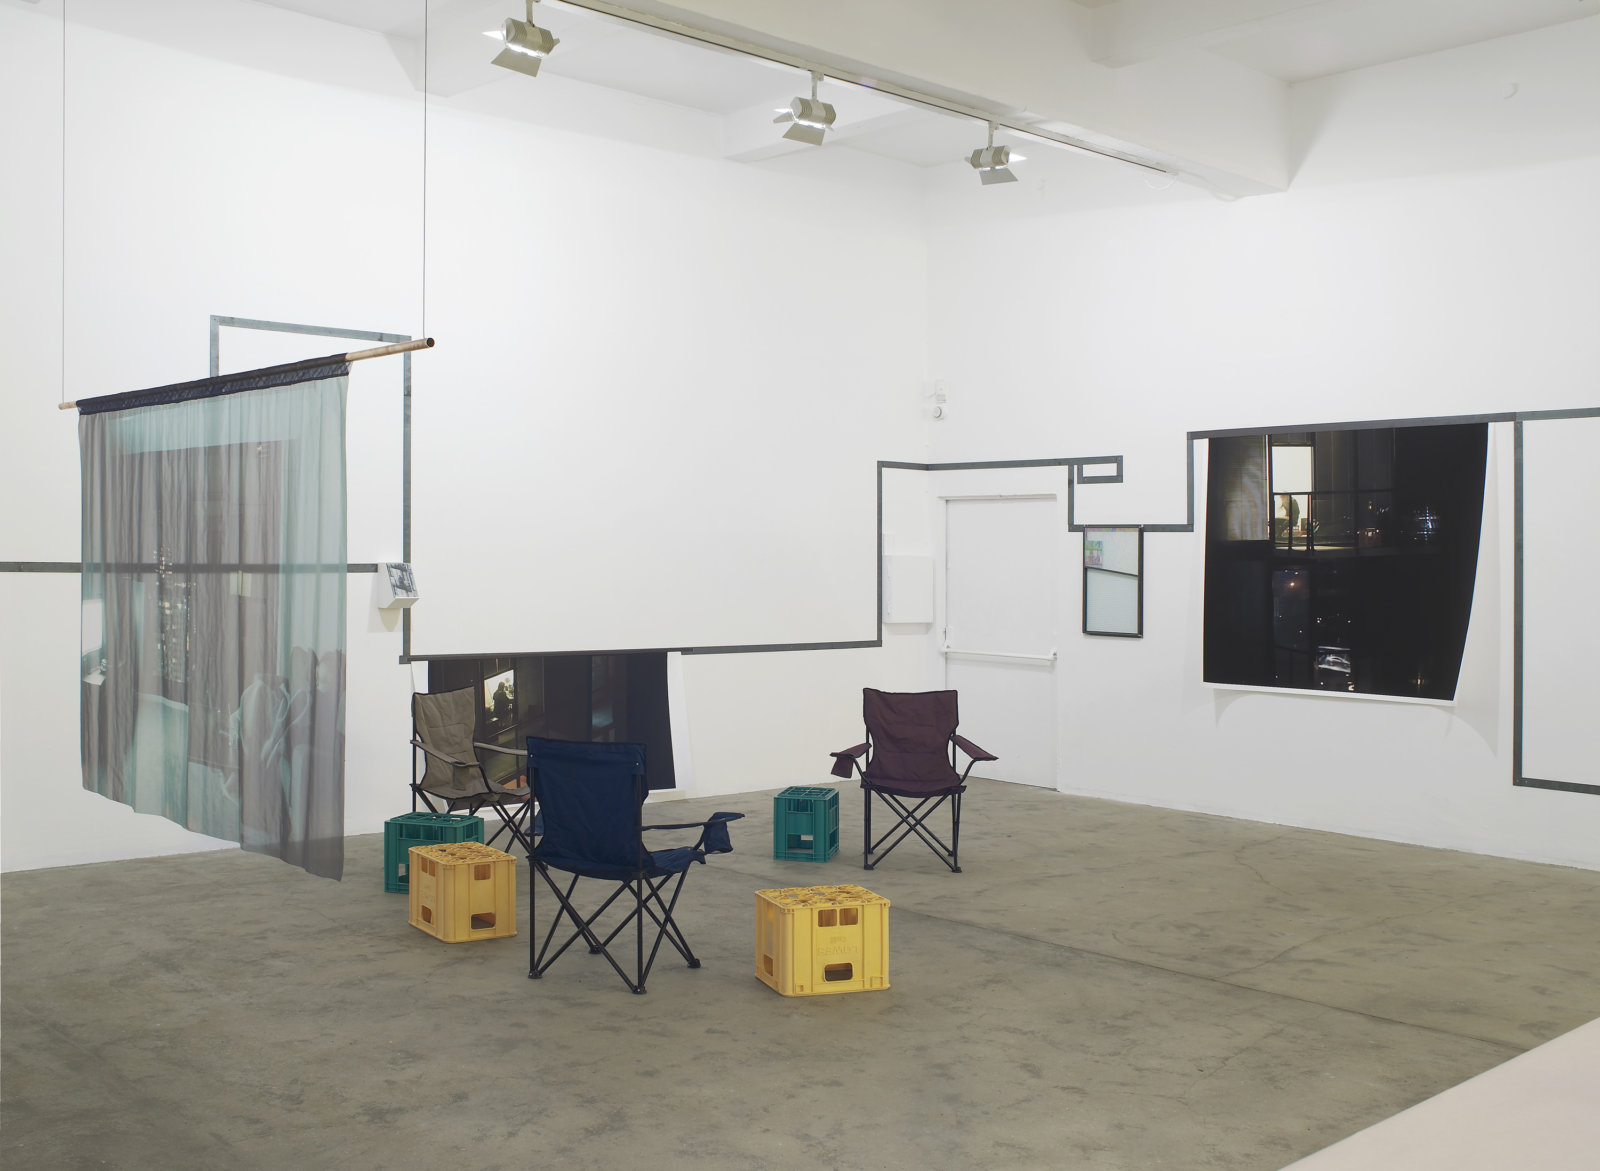 Christina Mackie, Us, The Residents, 2011–2012, stainless steel, inkjet prints, dye sublimation fabric prints, iridescent water glass, wood, magnets, copper pipe, aeroply, felt, beer crates, camping chairs, door furniture, CNC routed styrofoam, dimensions variable. Installation view, Painting the Weights, Chisenhale Gallery, London, UK, 2012